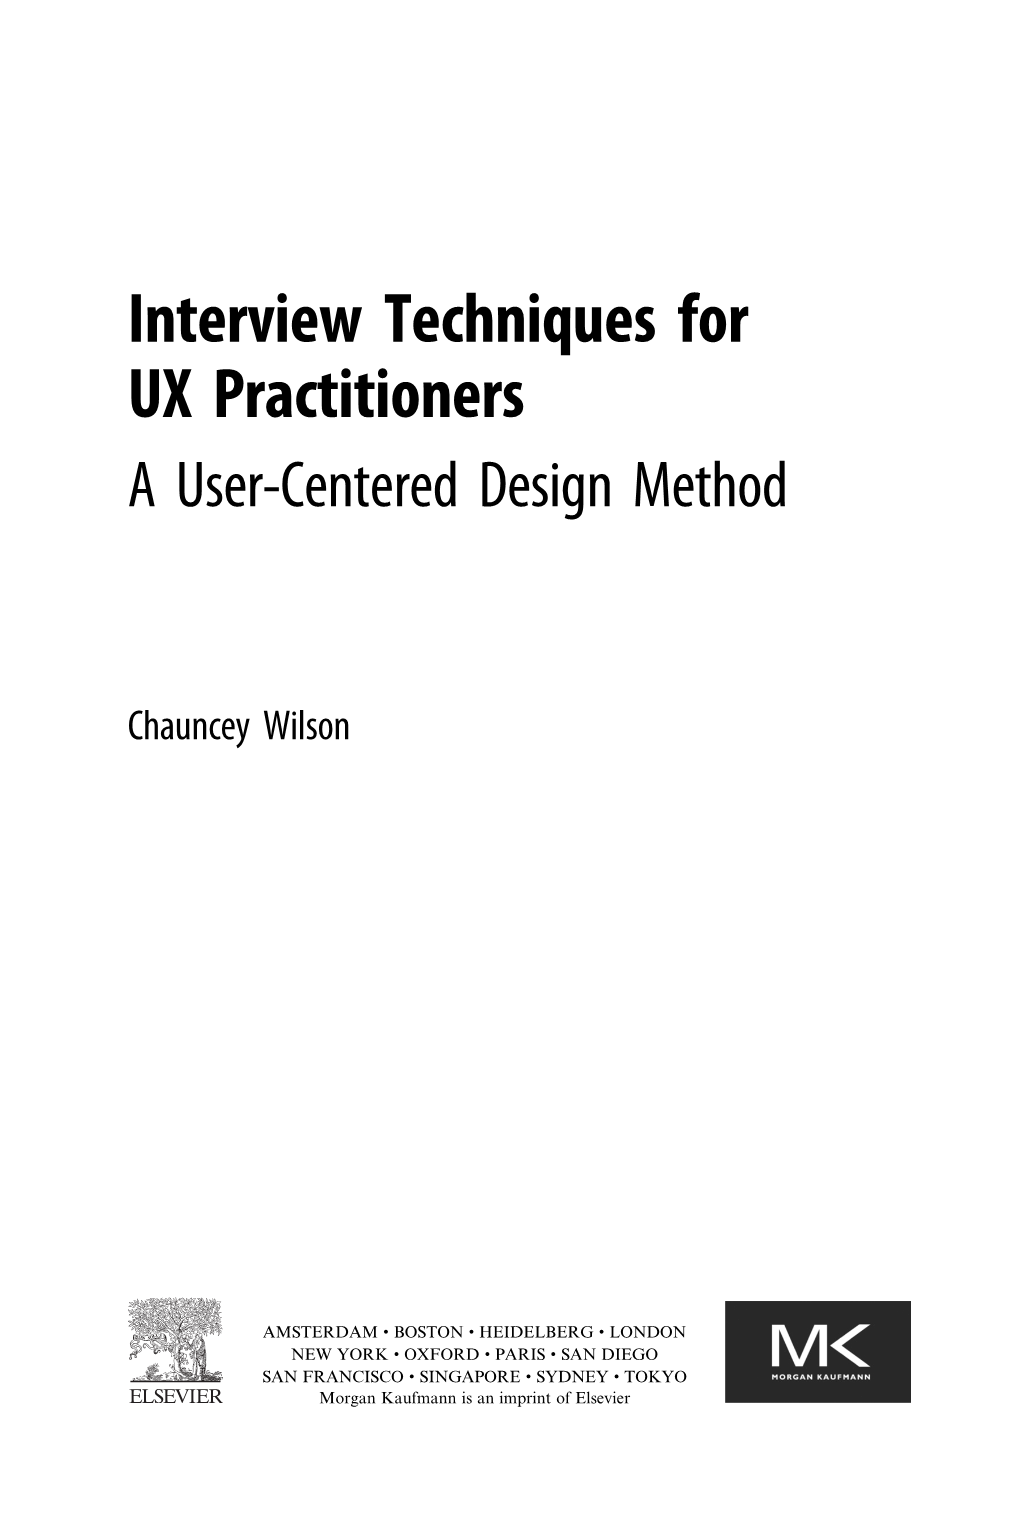 Interview Techniques for UX Practitioners Auser-Centereddesignmethod